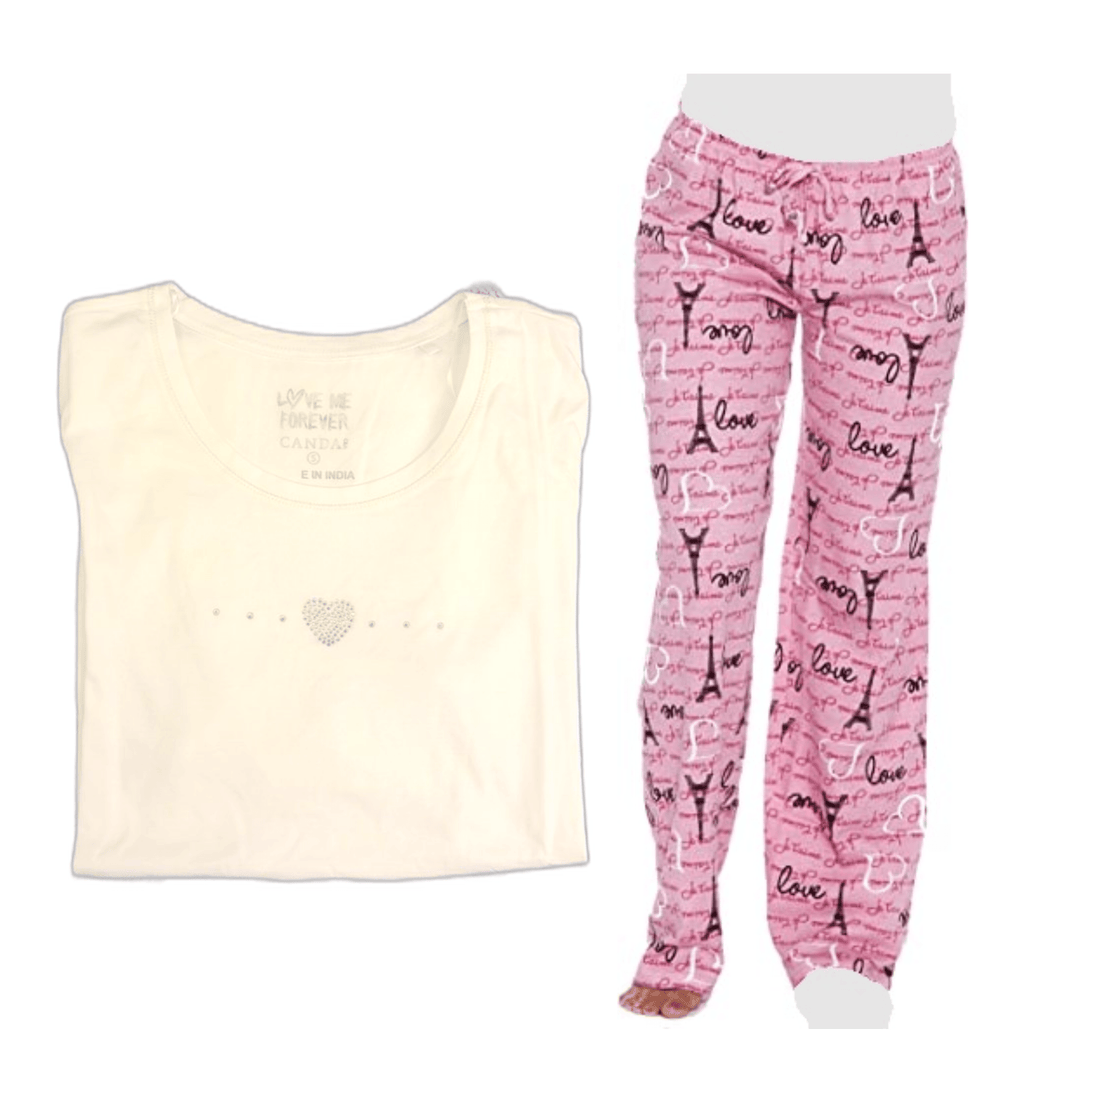 Women's Cozy Pajama Set EIFFEL TOWER Pants and Cotton Soft Heart T shirt by Just Love - PremiumBrandGoods